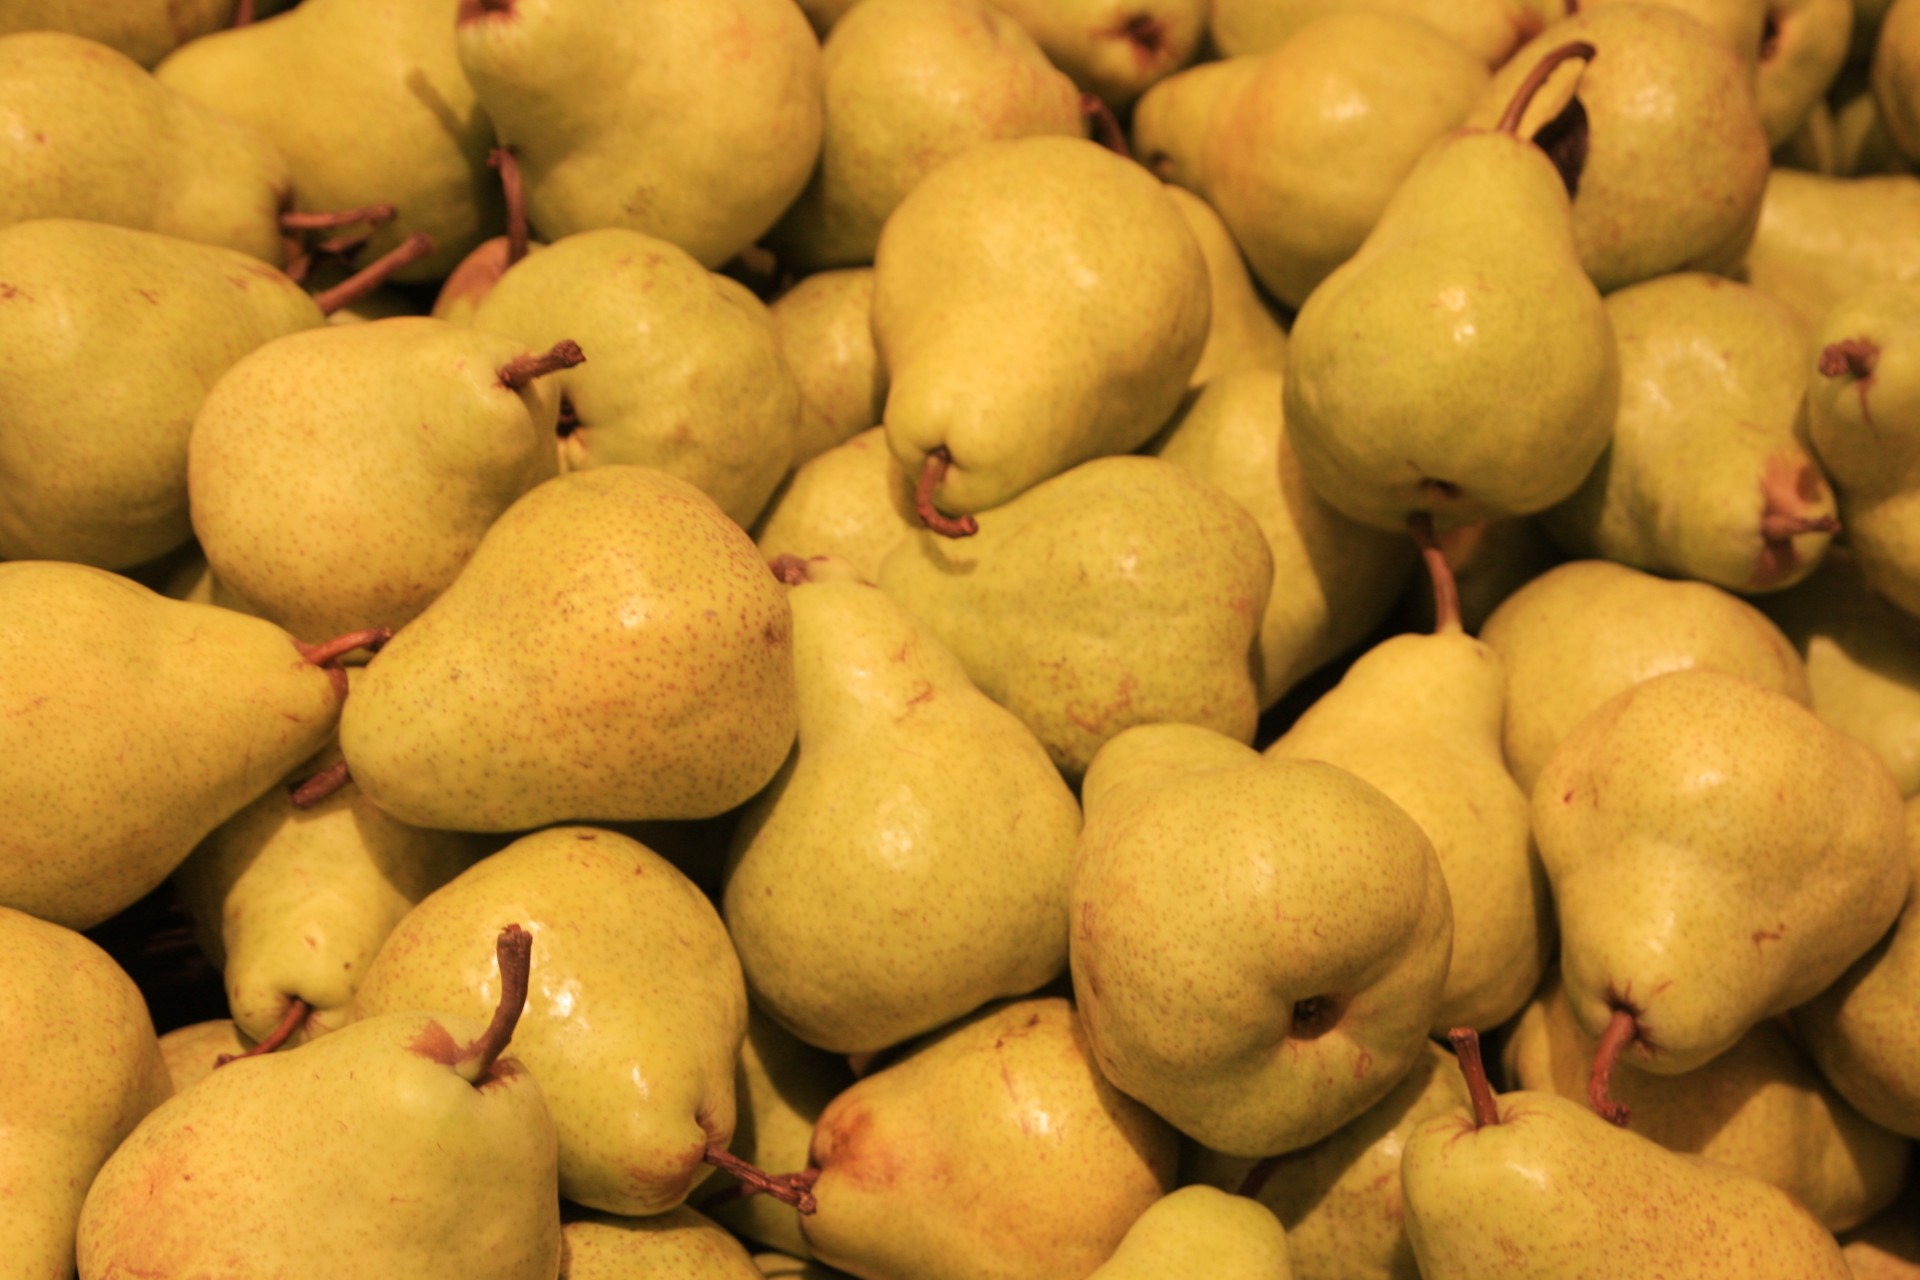 An array of yellow fresh pears